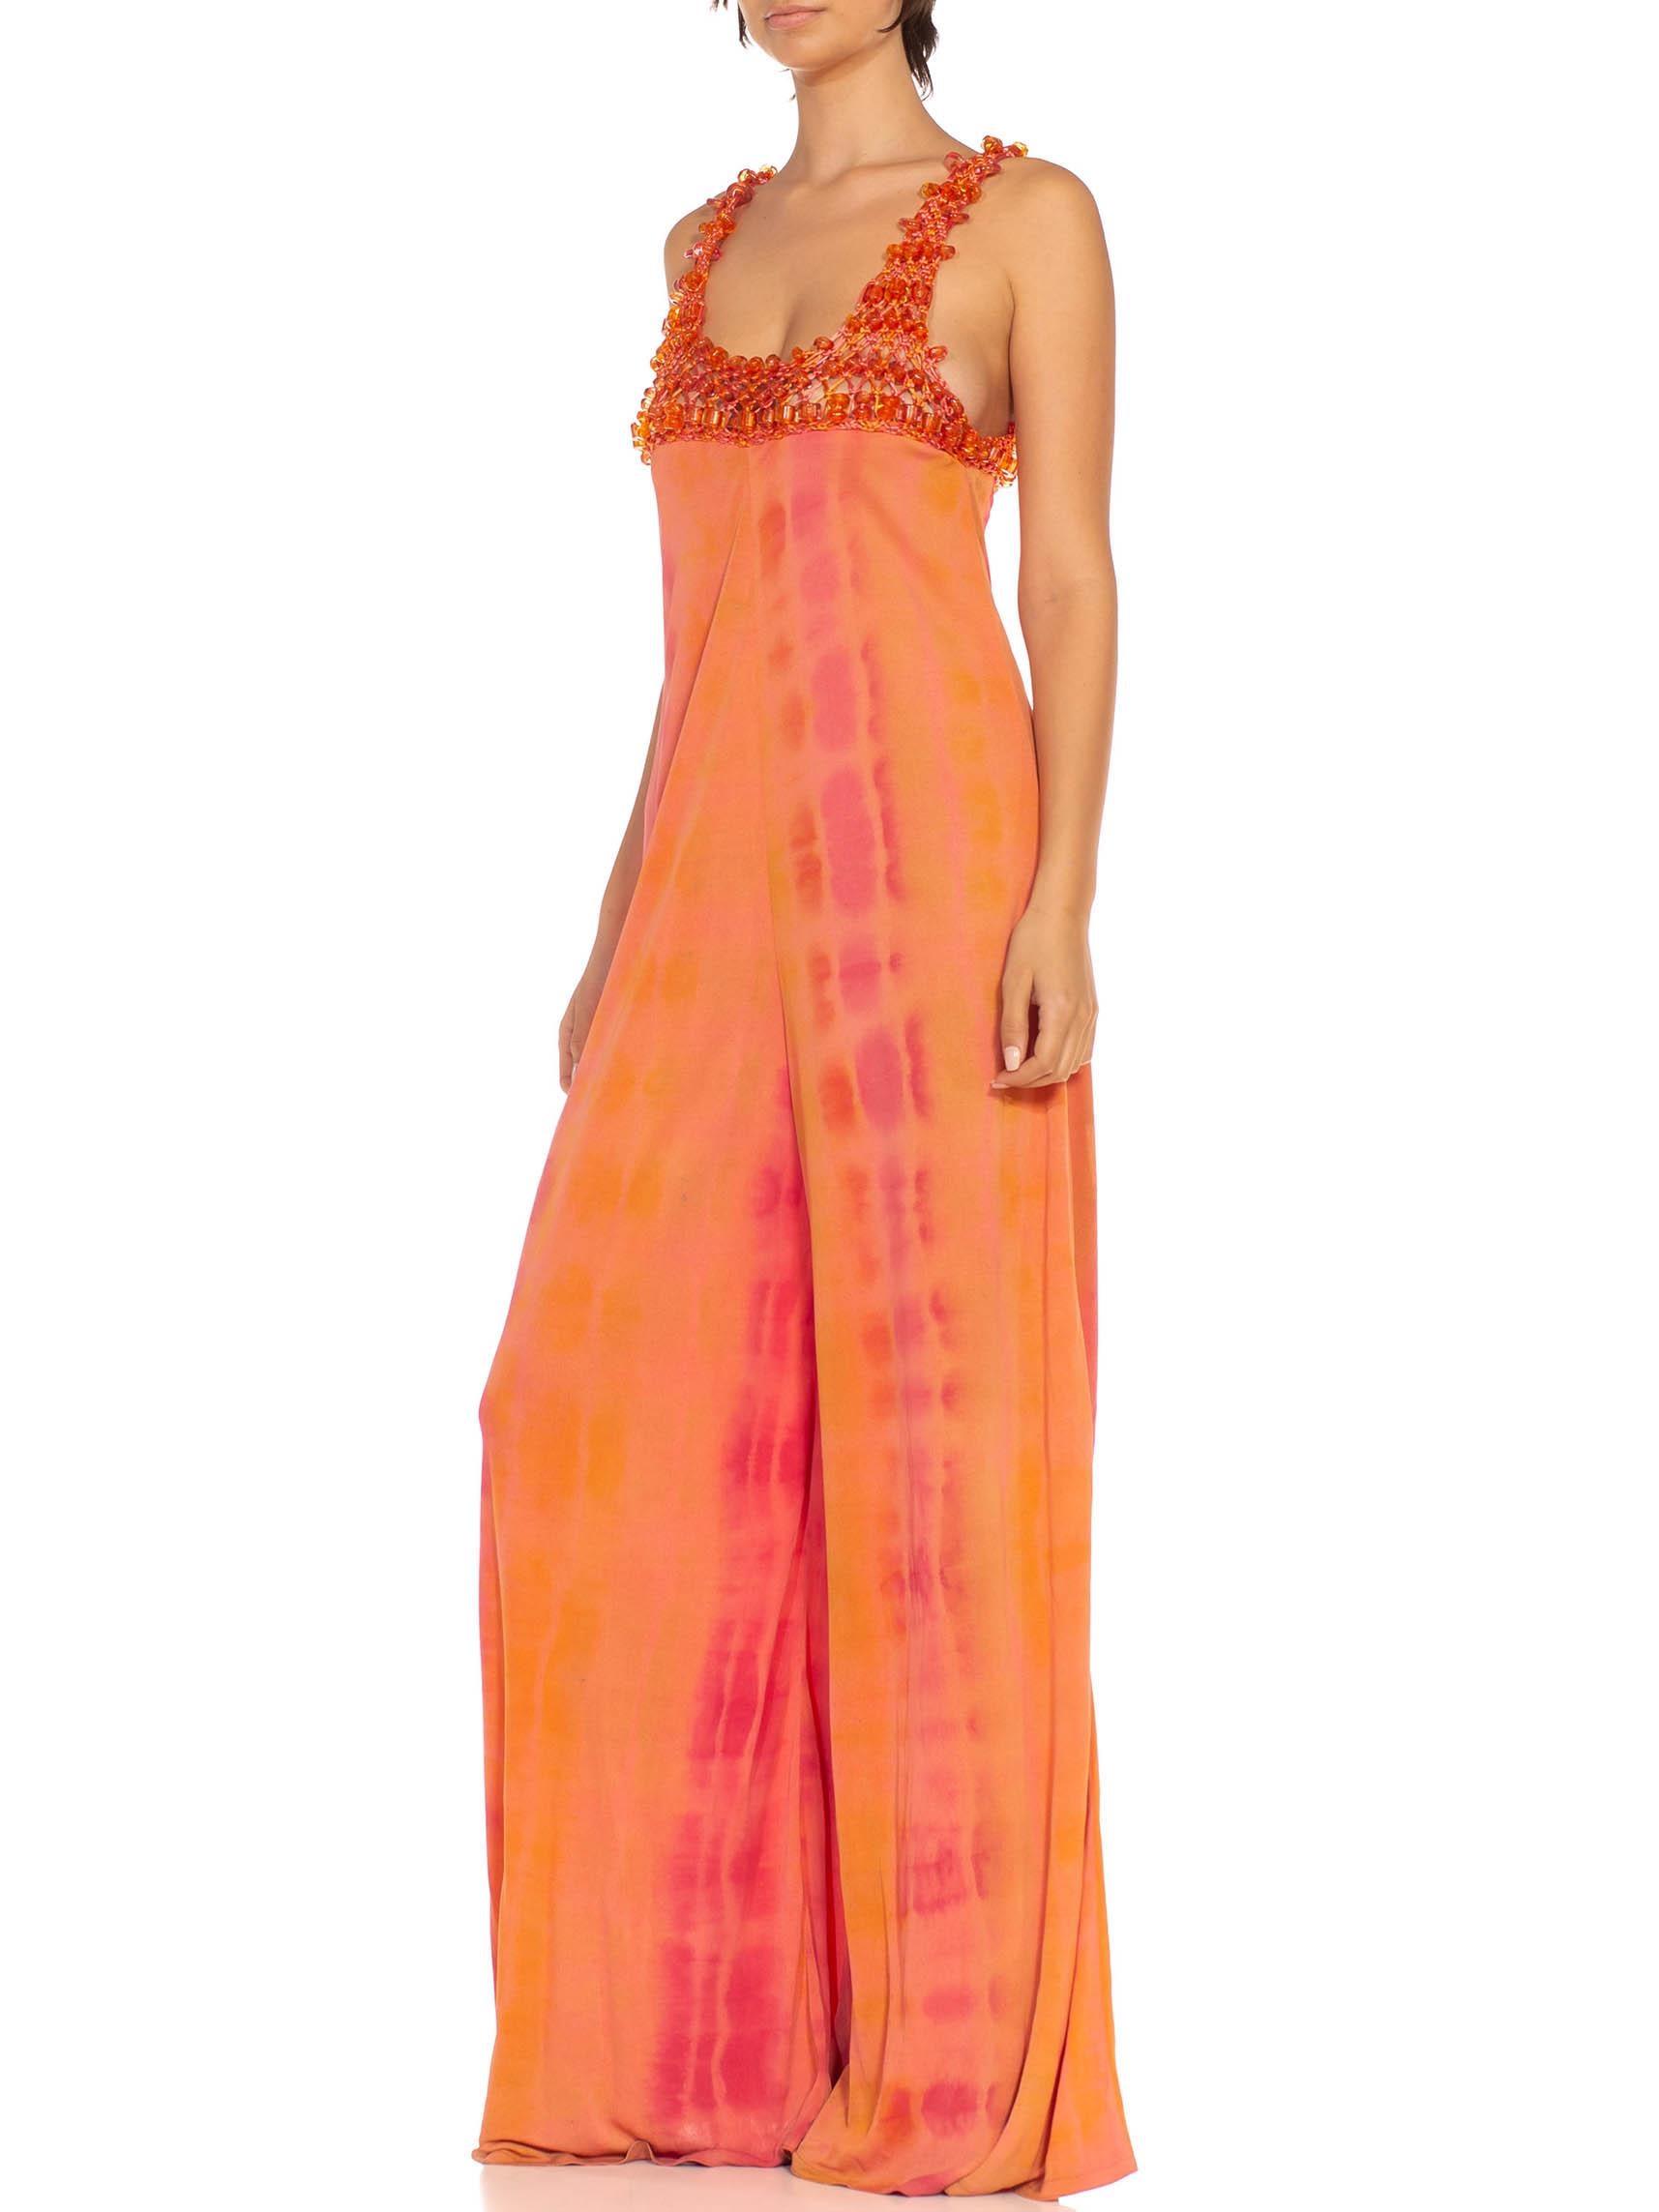 2000S Orange Peach Poly Blend Jersey Tie Dye Jumpsuit With Crochet Beaded Straps For Sale 3